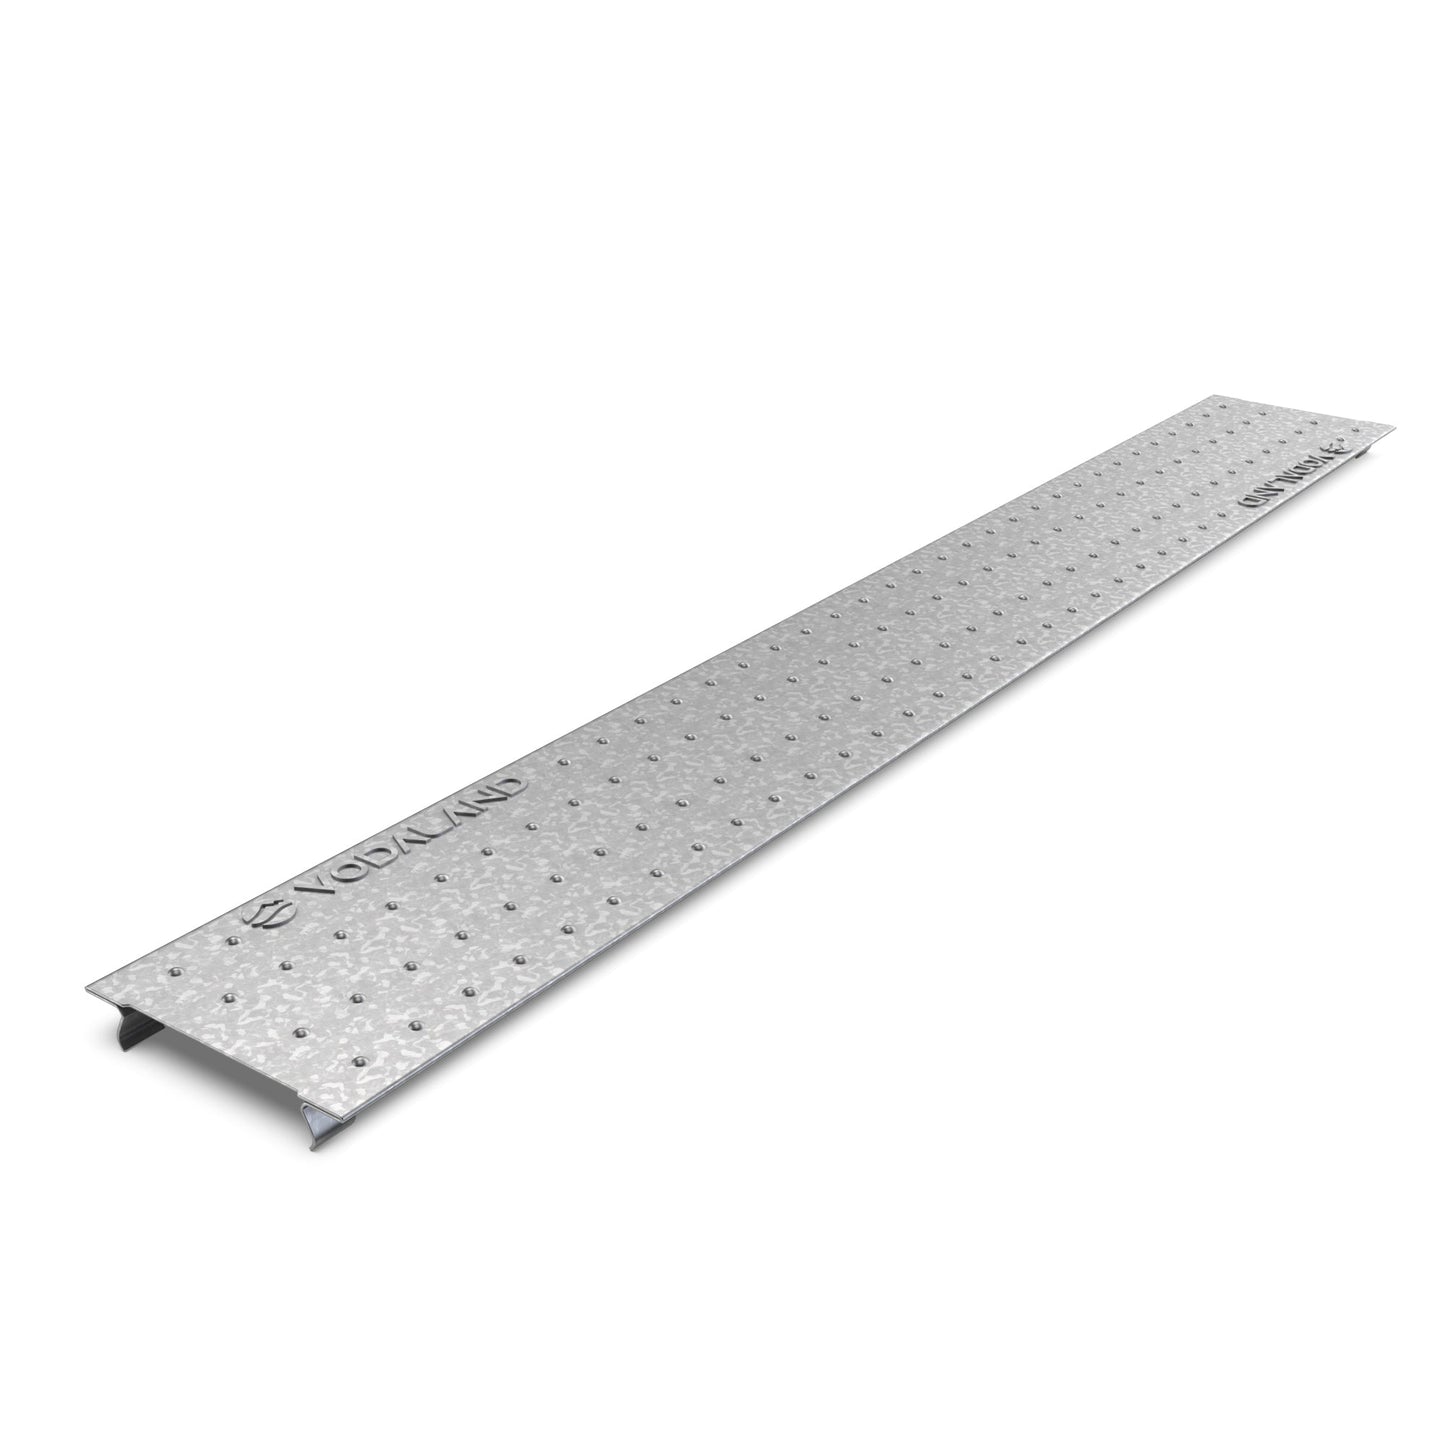 4" Galvanized Solid Grate Cover - Vodaland